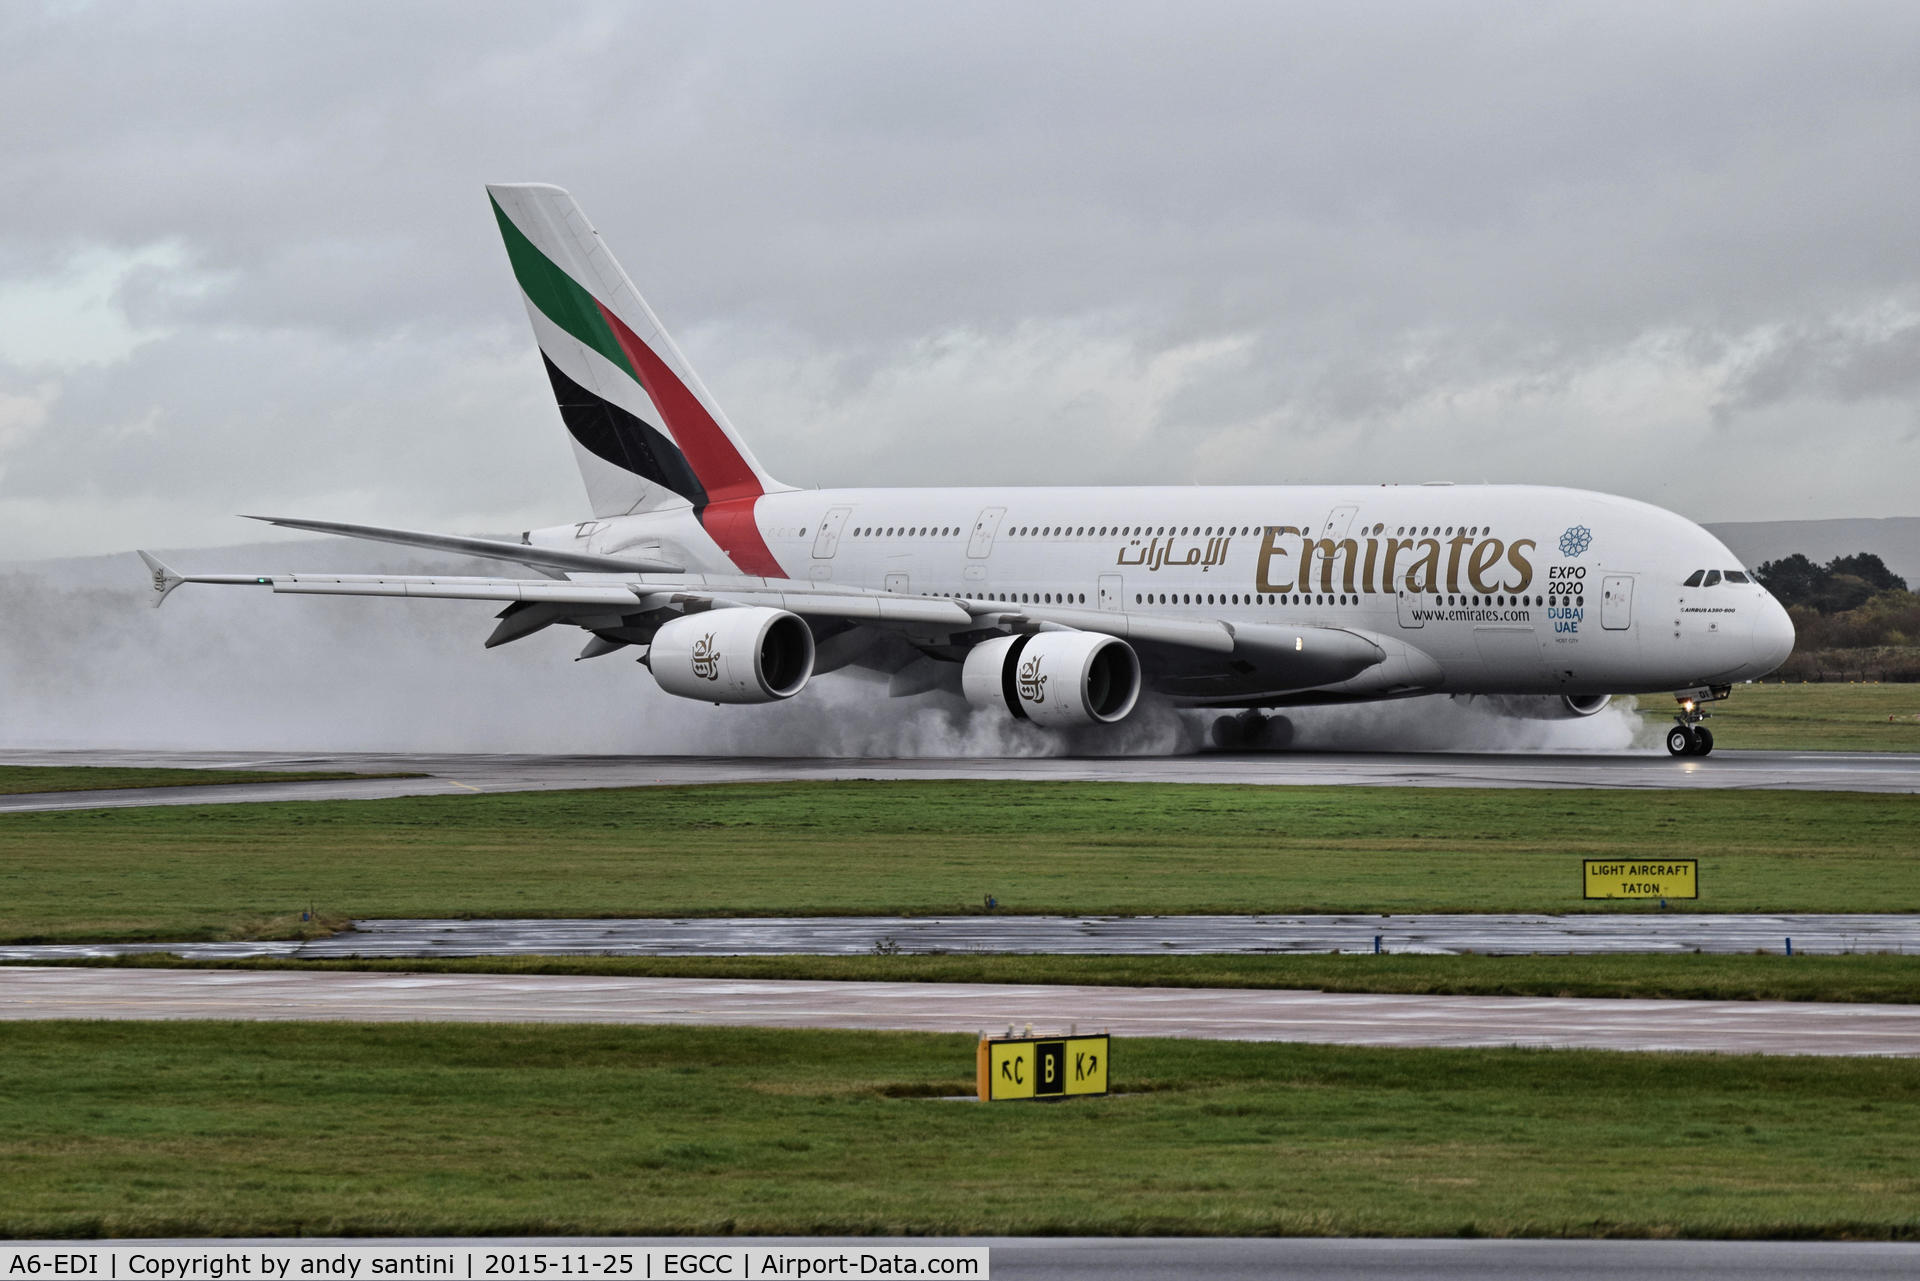 A6-EDI, 2009 Airbus A380-861 C/N 028, just landed on 23R very wet runway